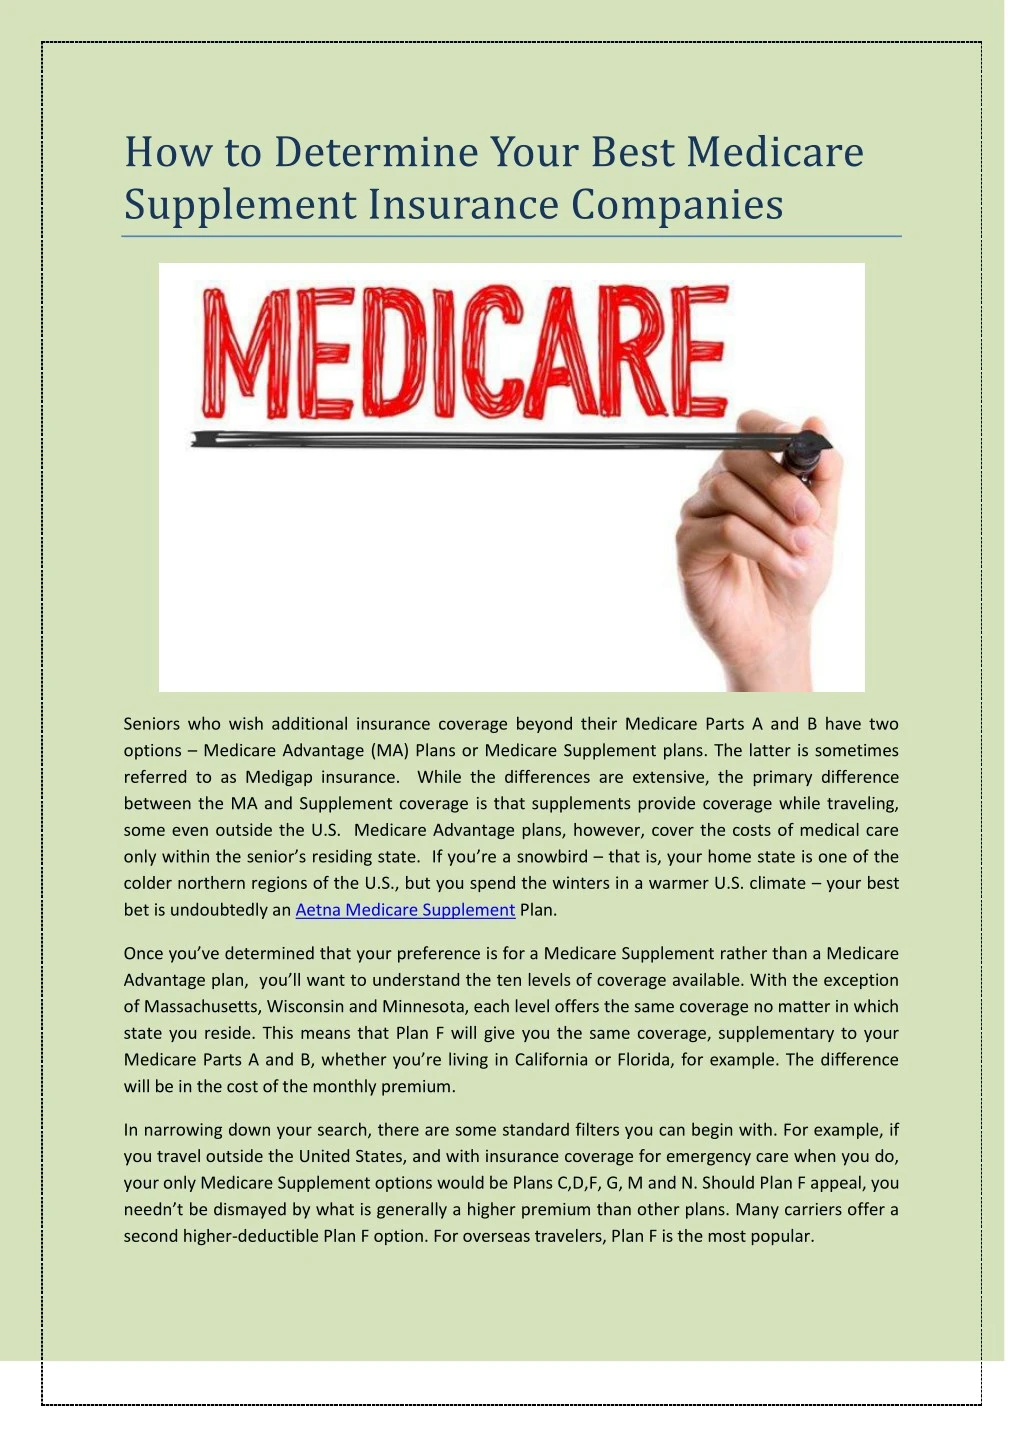 how to determine your best medicare supplement